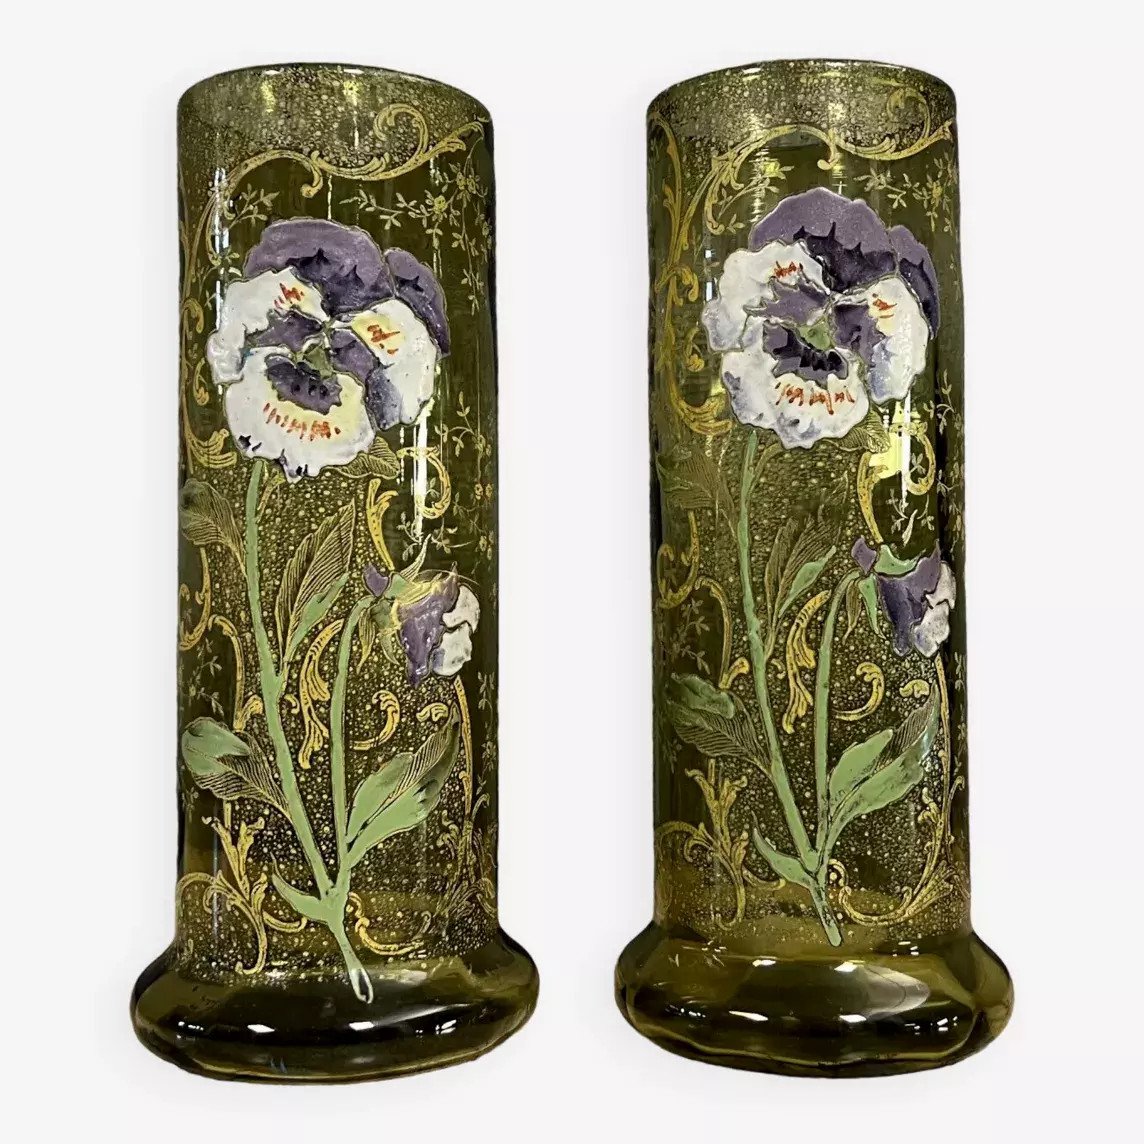 Large Pair Of Enameled Glass Roller Vases Decorated With Flowers (pansies)